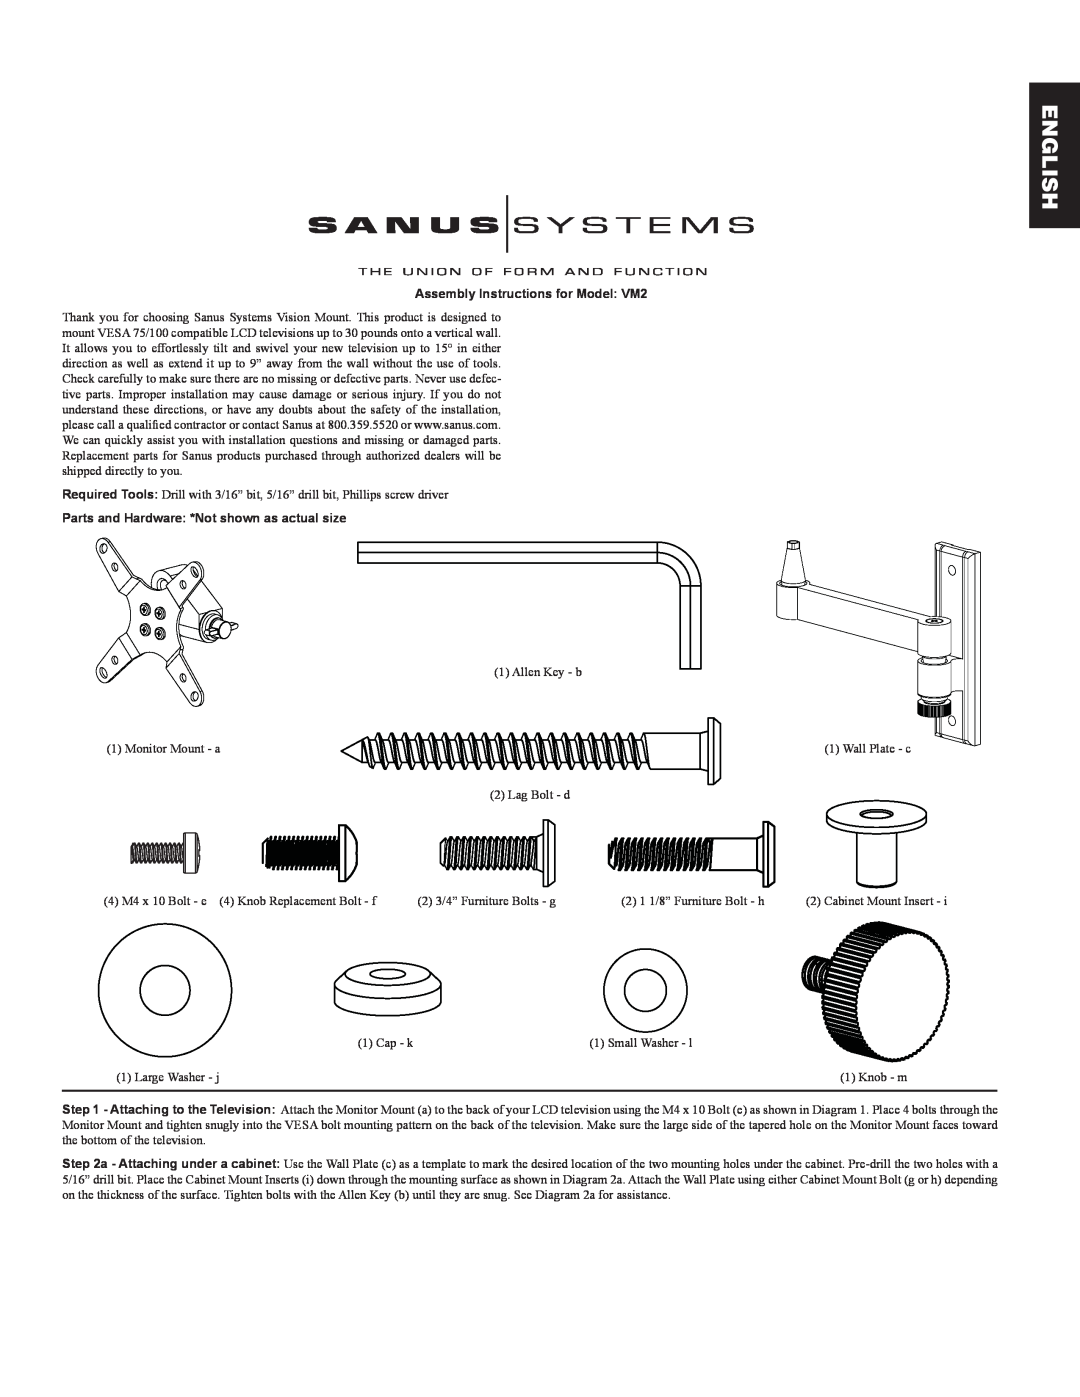 Sanus Systems manual English, Assembly Instructions for Model VM2, Parts and Hardware *Not shown as actual size 